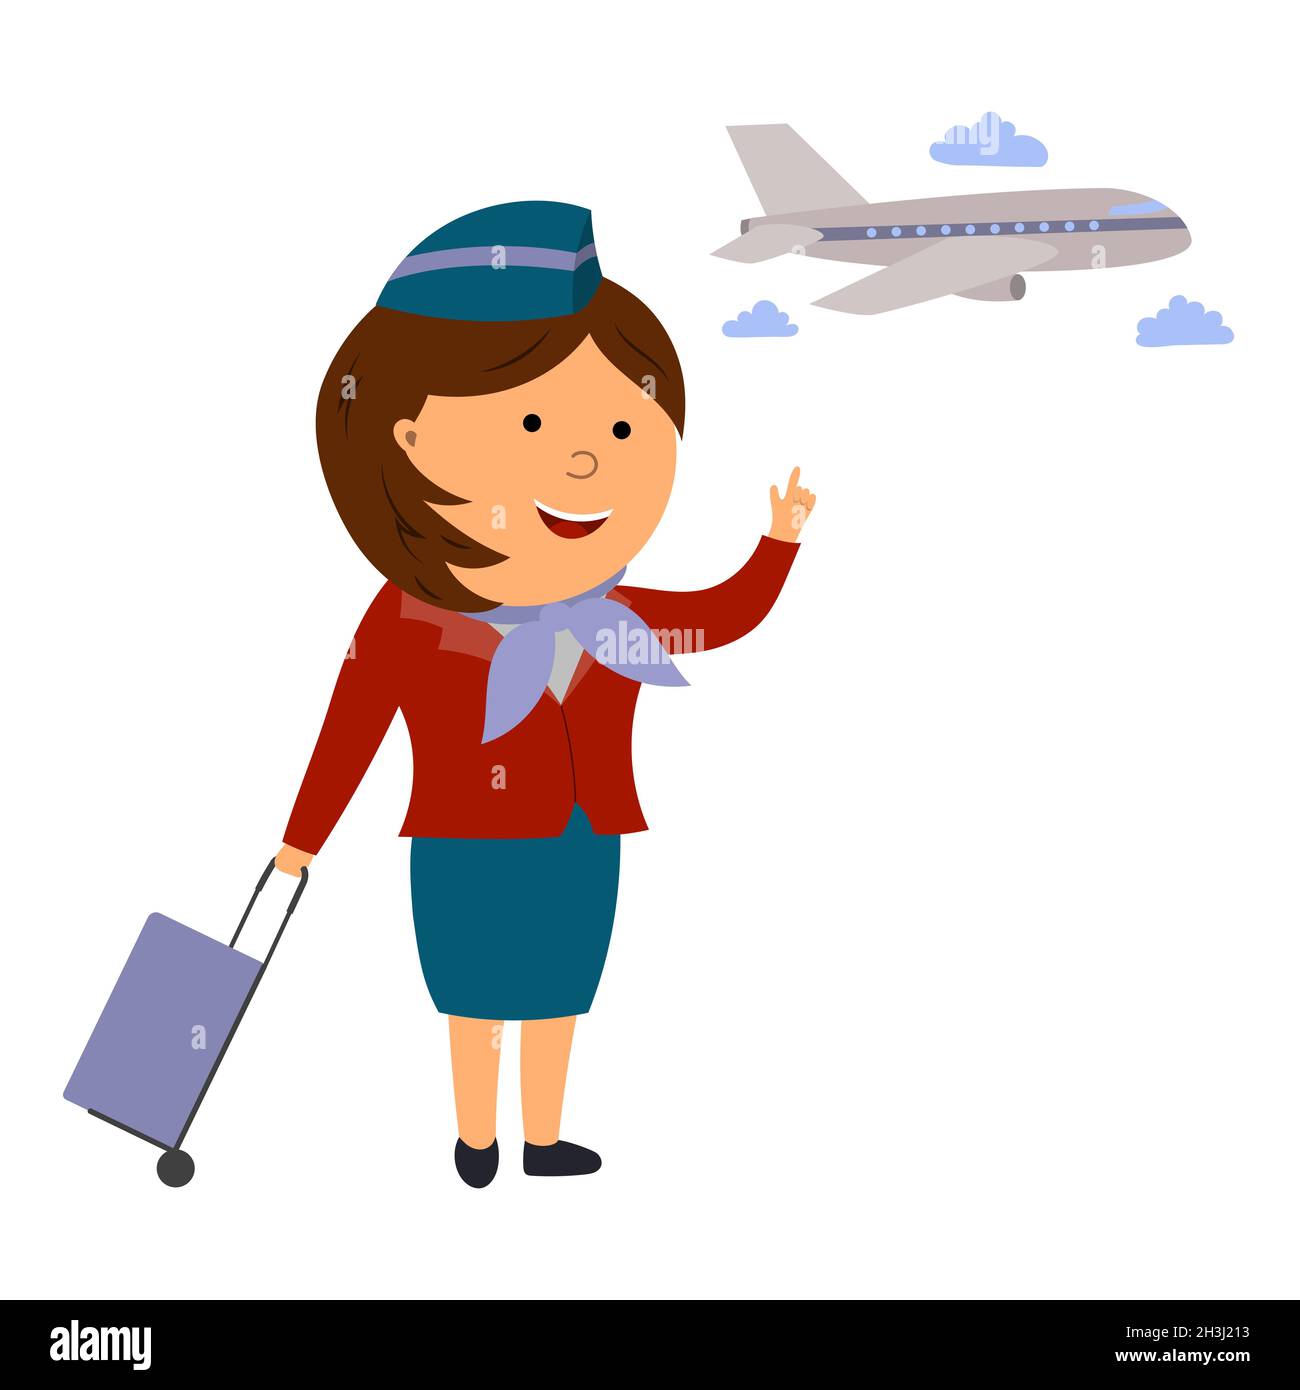 illustration of a flight attendant and an airplane, vector isolated on a white background. Stock Vector